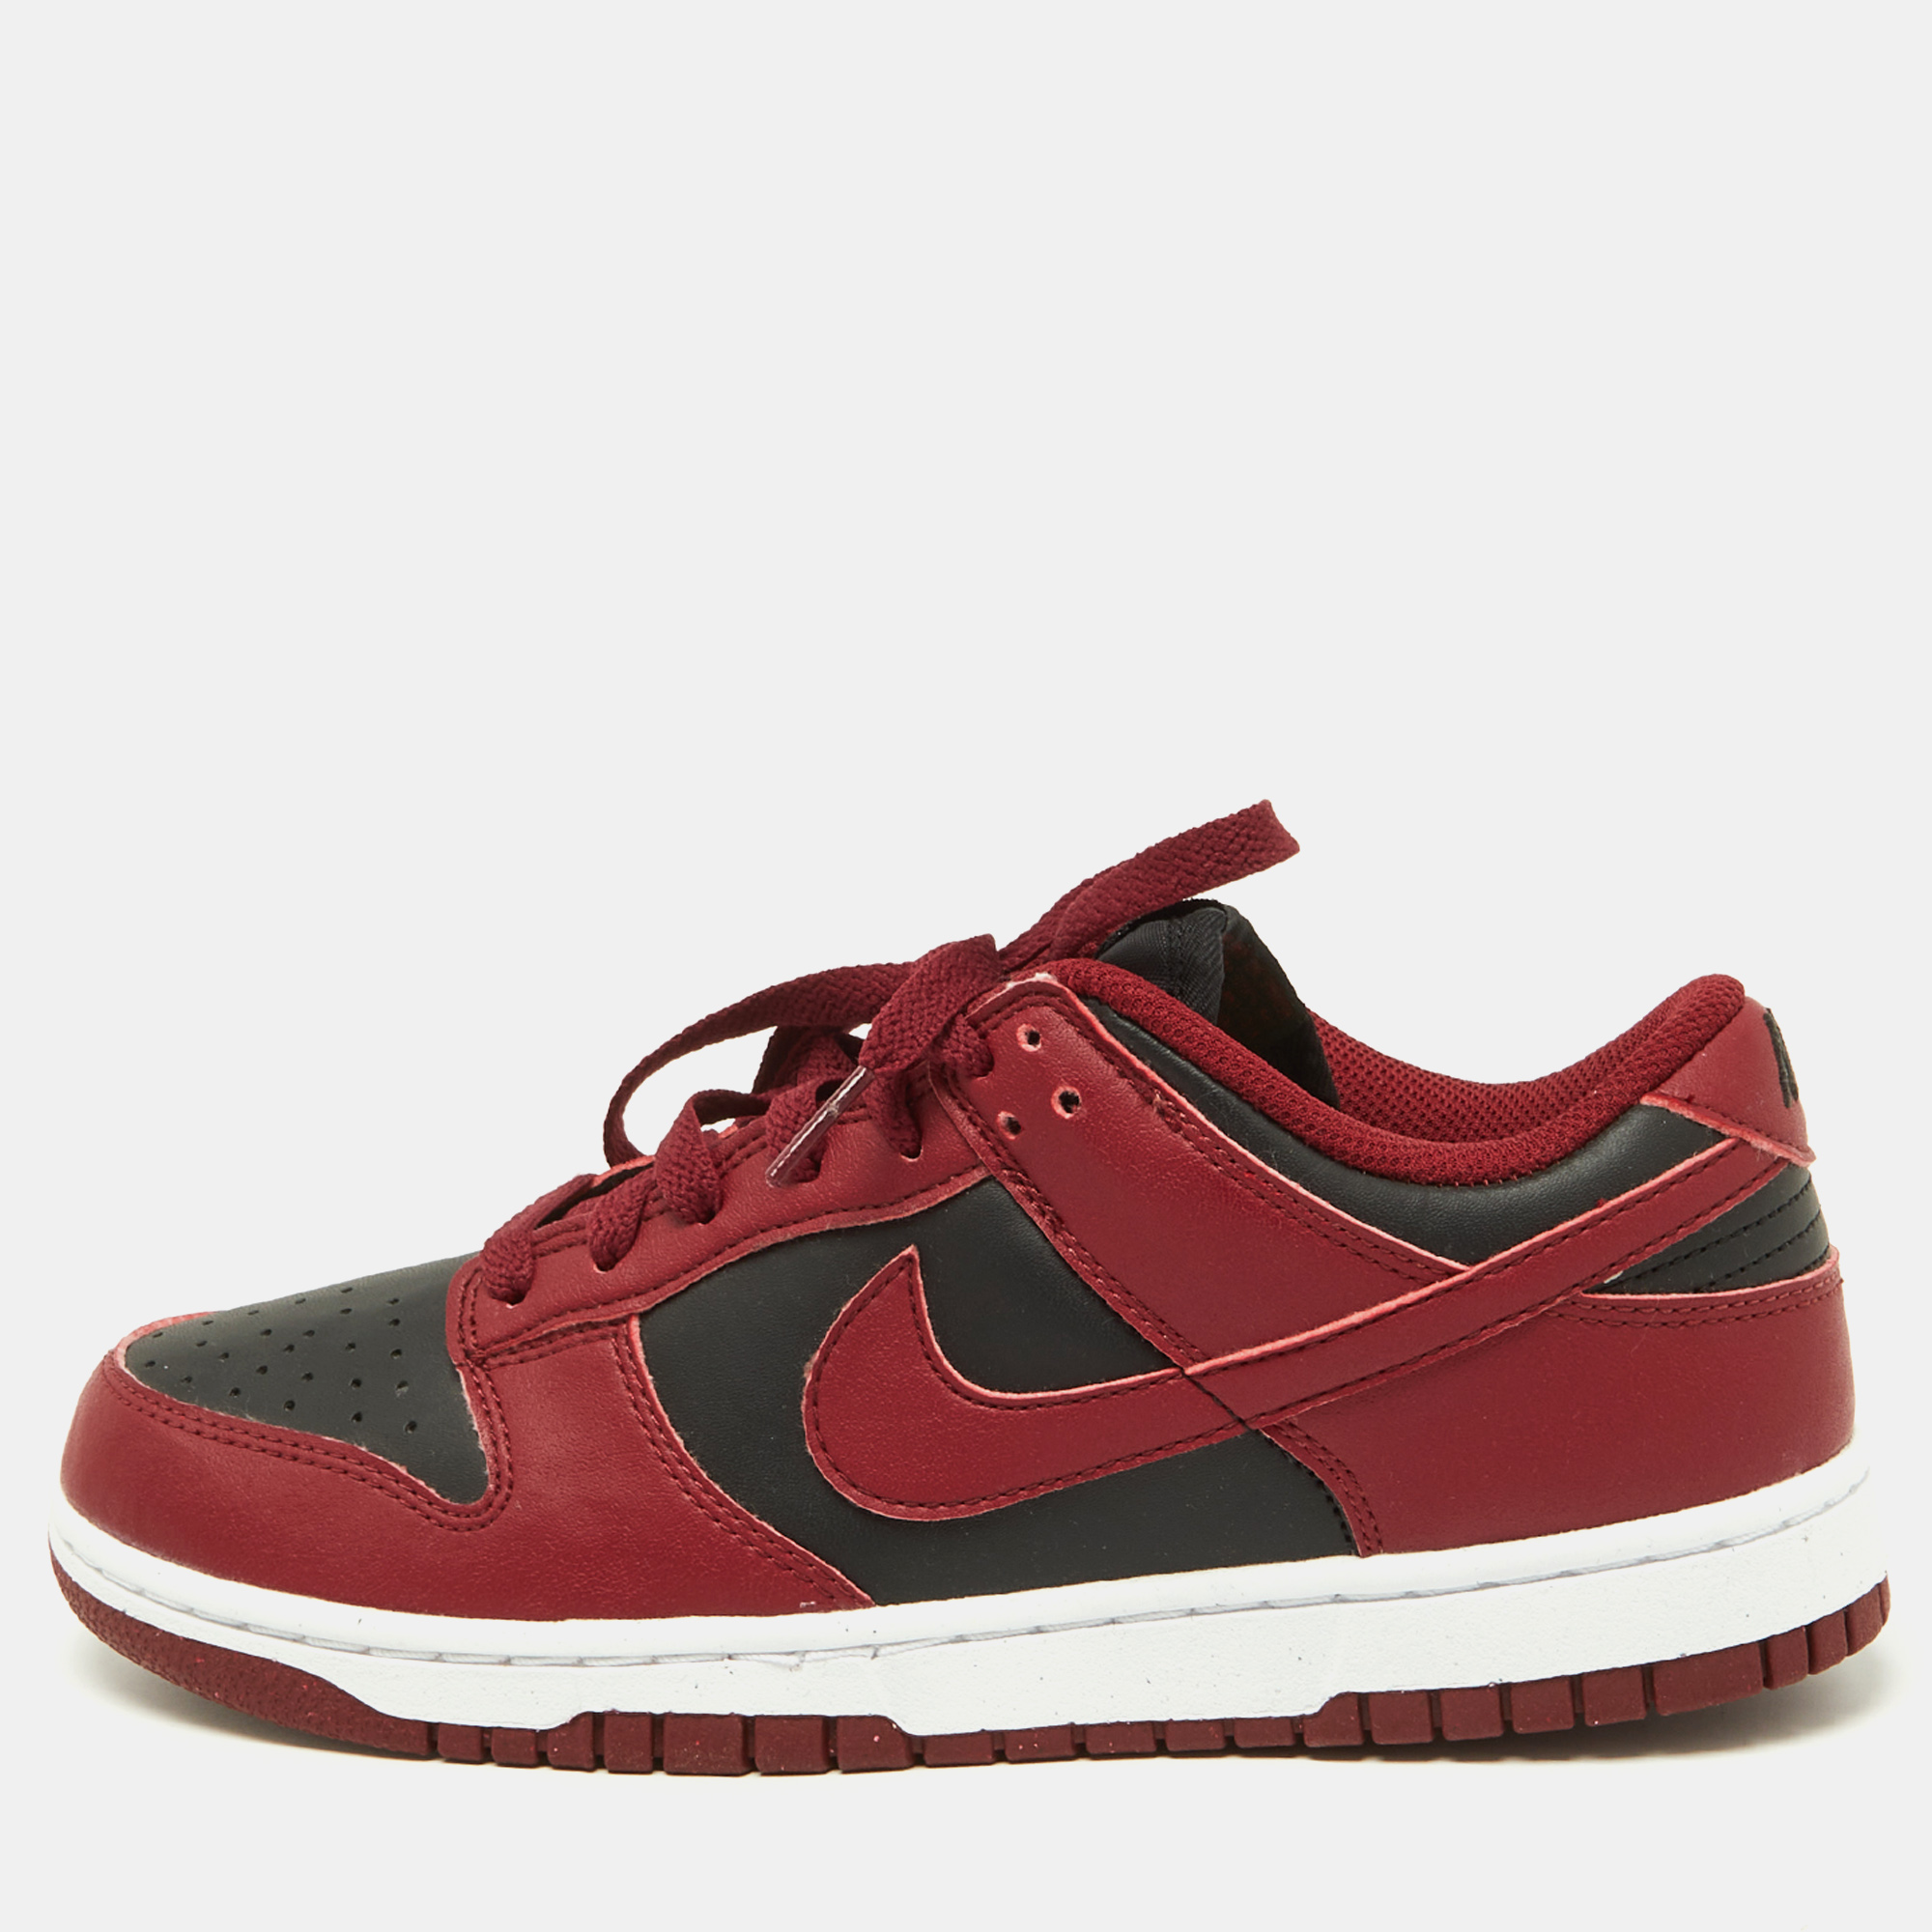 

Nike Red/Black Leather Dunk Low Top "Team Red" Sneakers Size